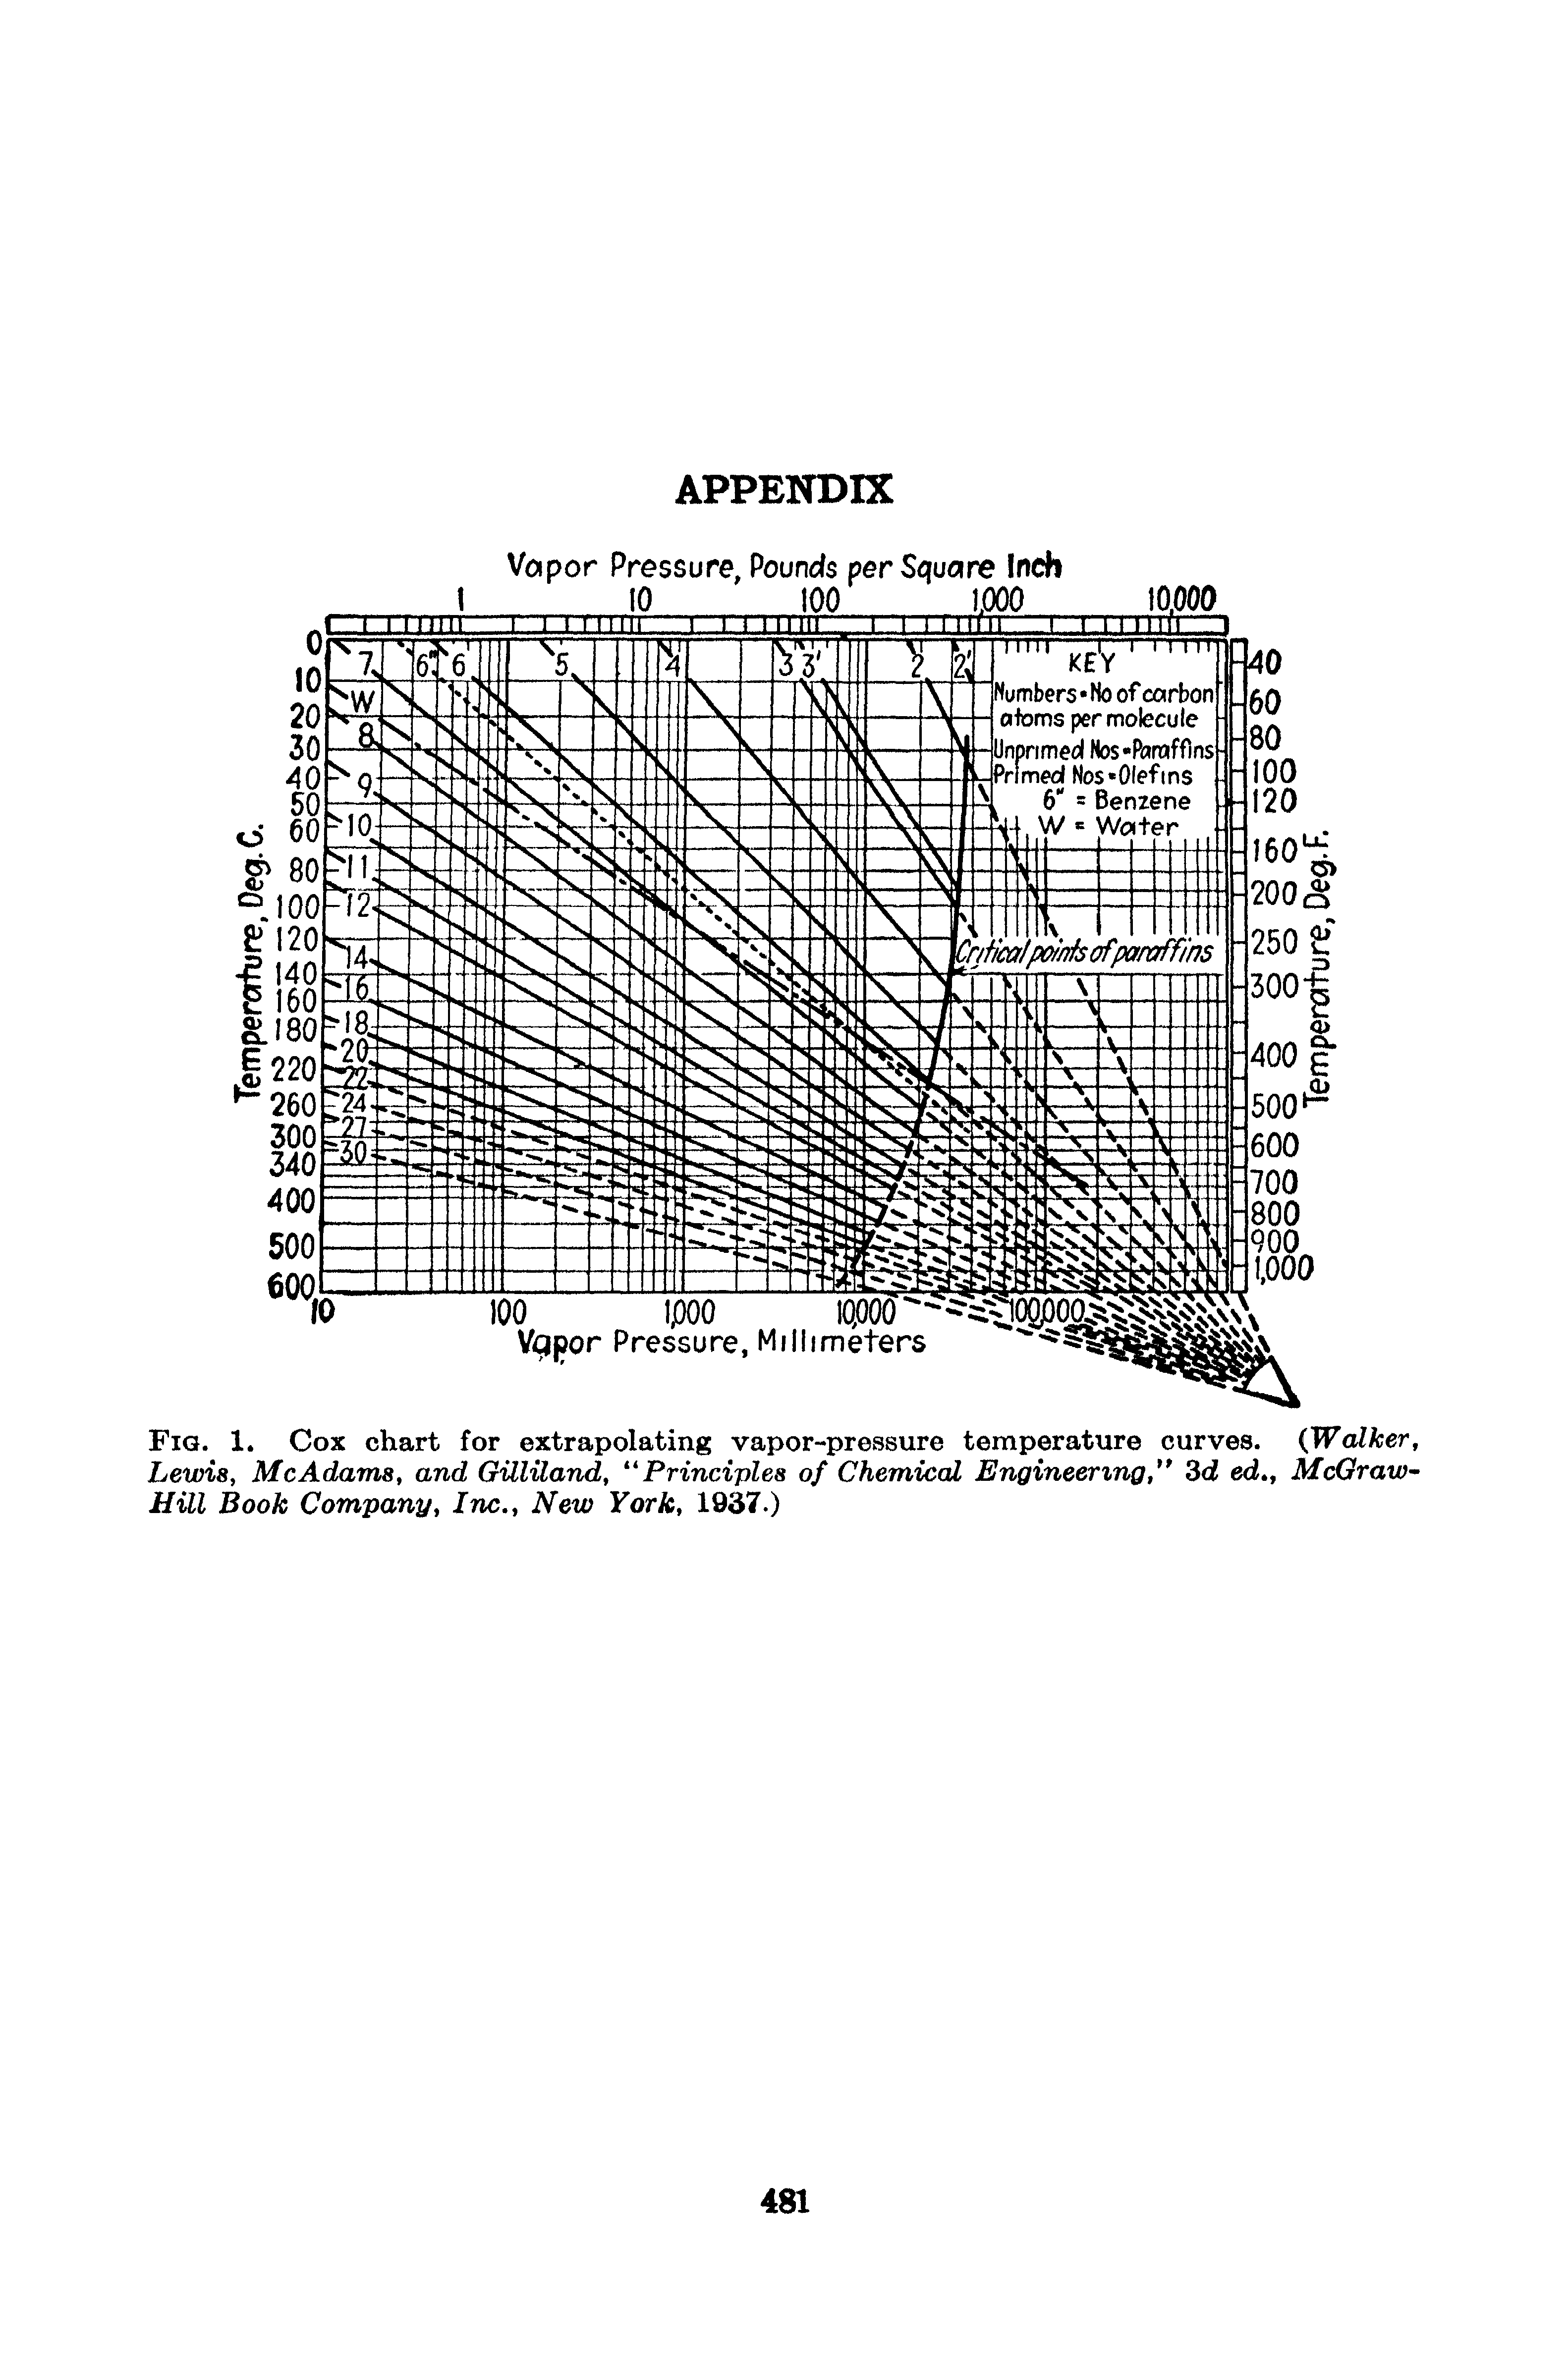 Fig. 1. Cox chart for extrapolating vapor-pressure temperature curves. Lewis, McAdams, and Gilliland, " Principles of Chemical Engineering, 3d ed UUl Book Company, Inc., New York, 1937.)...